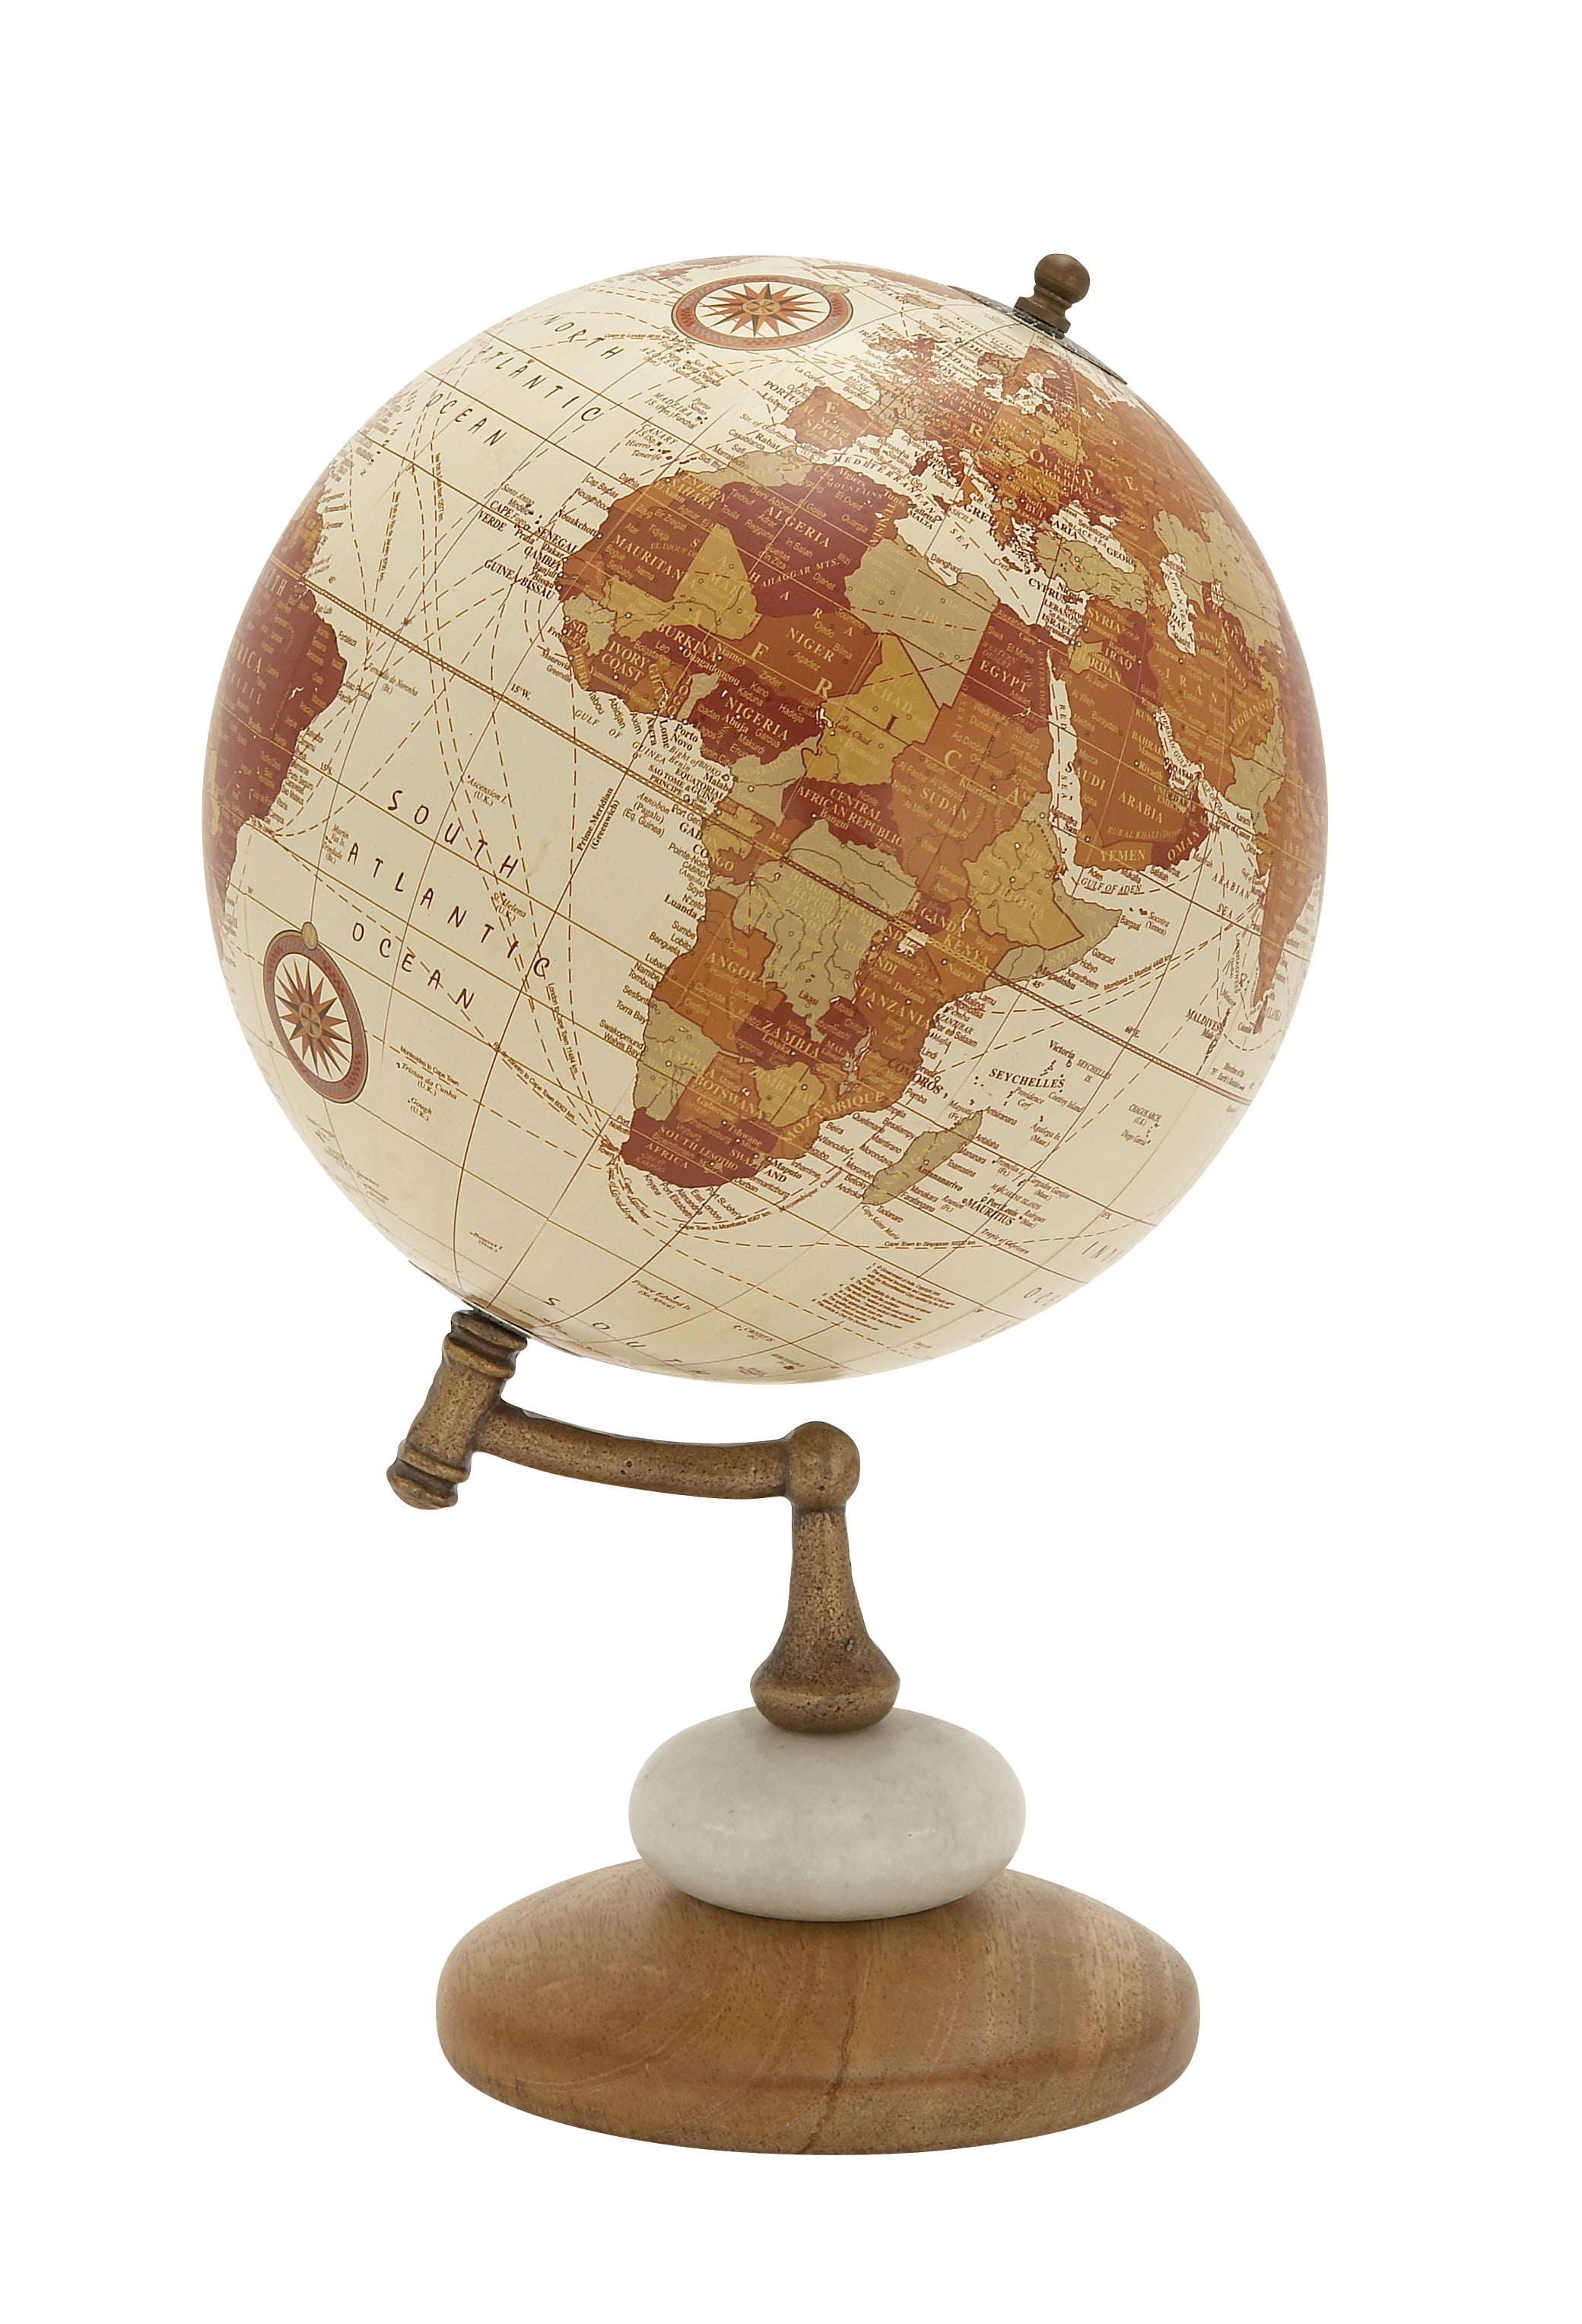 Antique Brass Decorative Globe Map Ornament with Brown Wooden Tripod Stand 